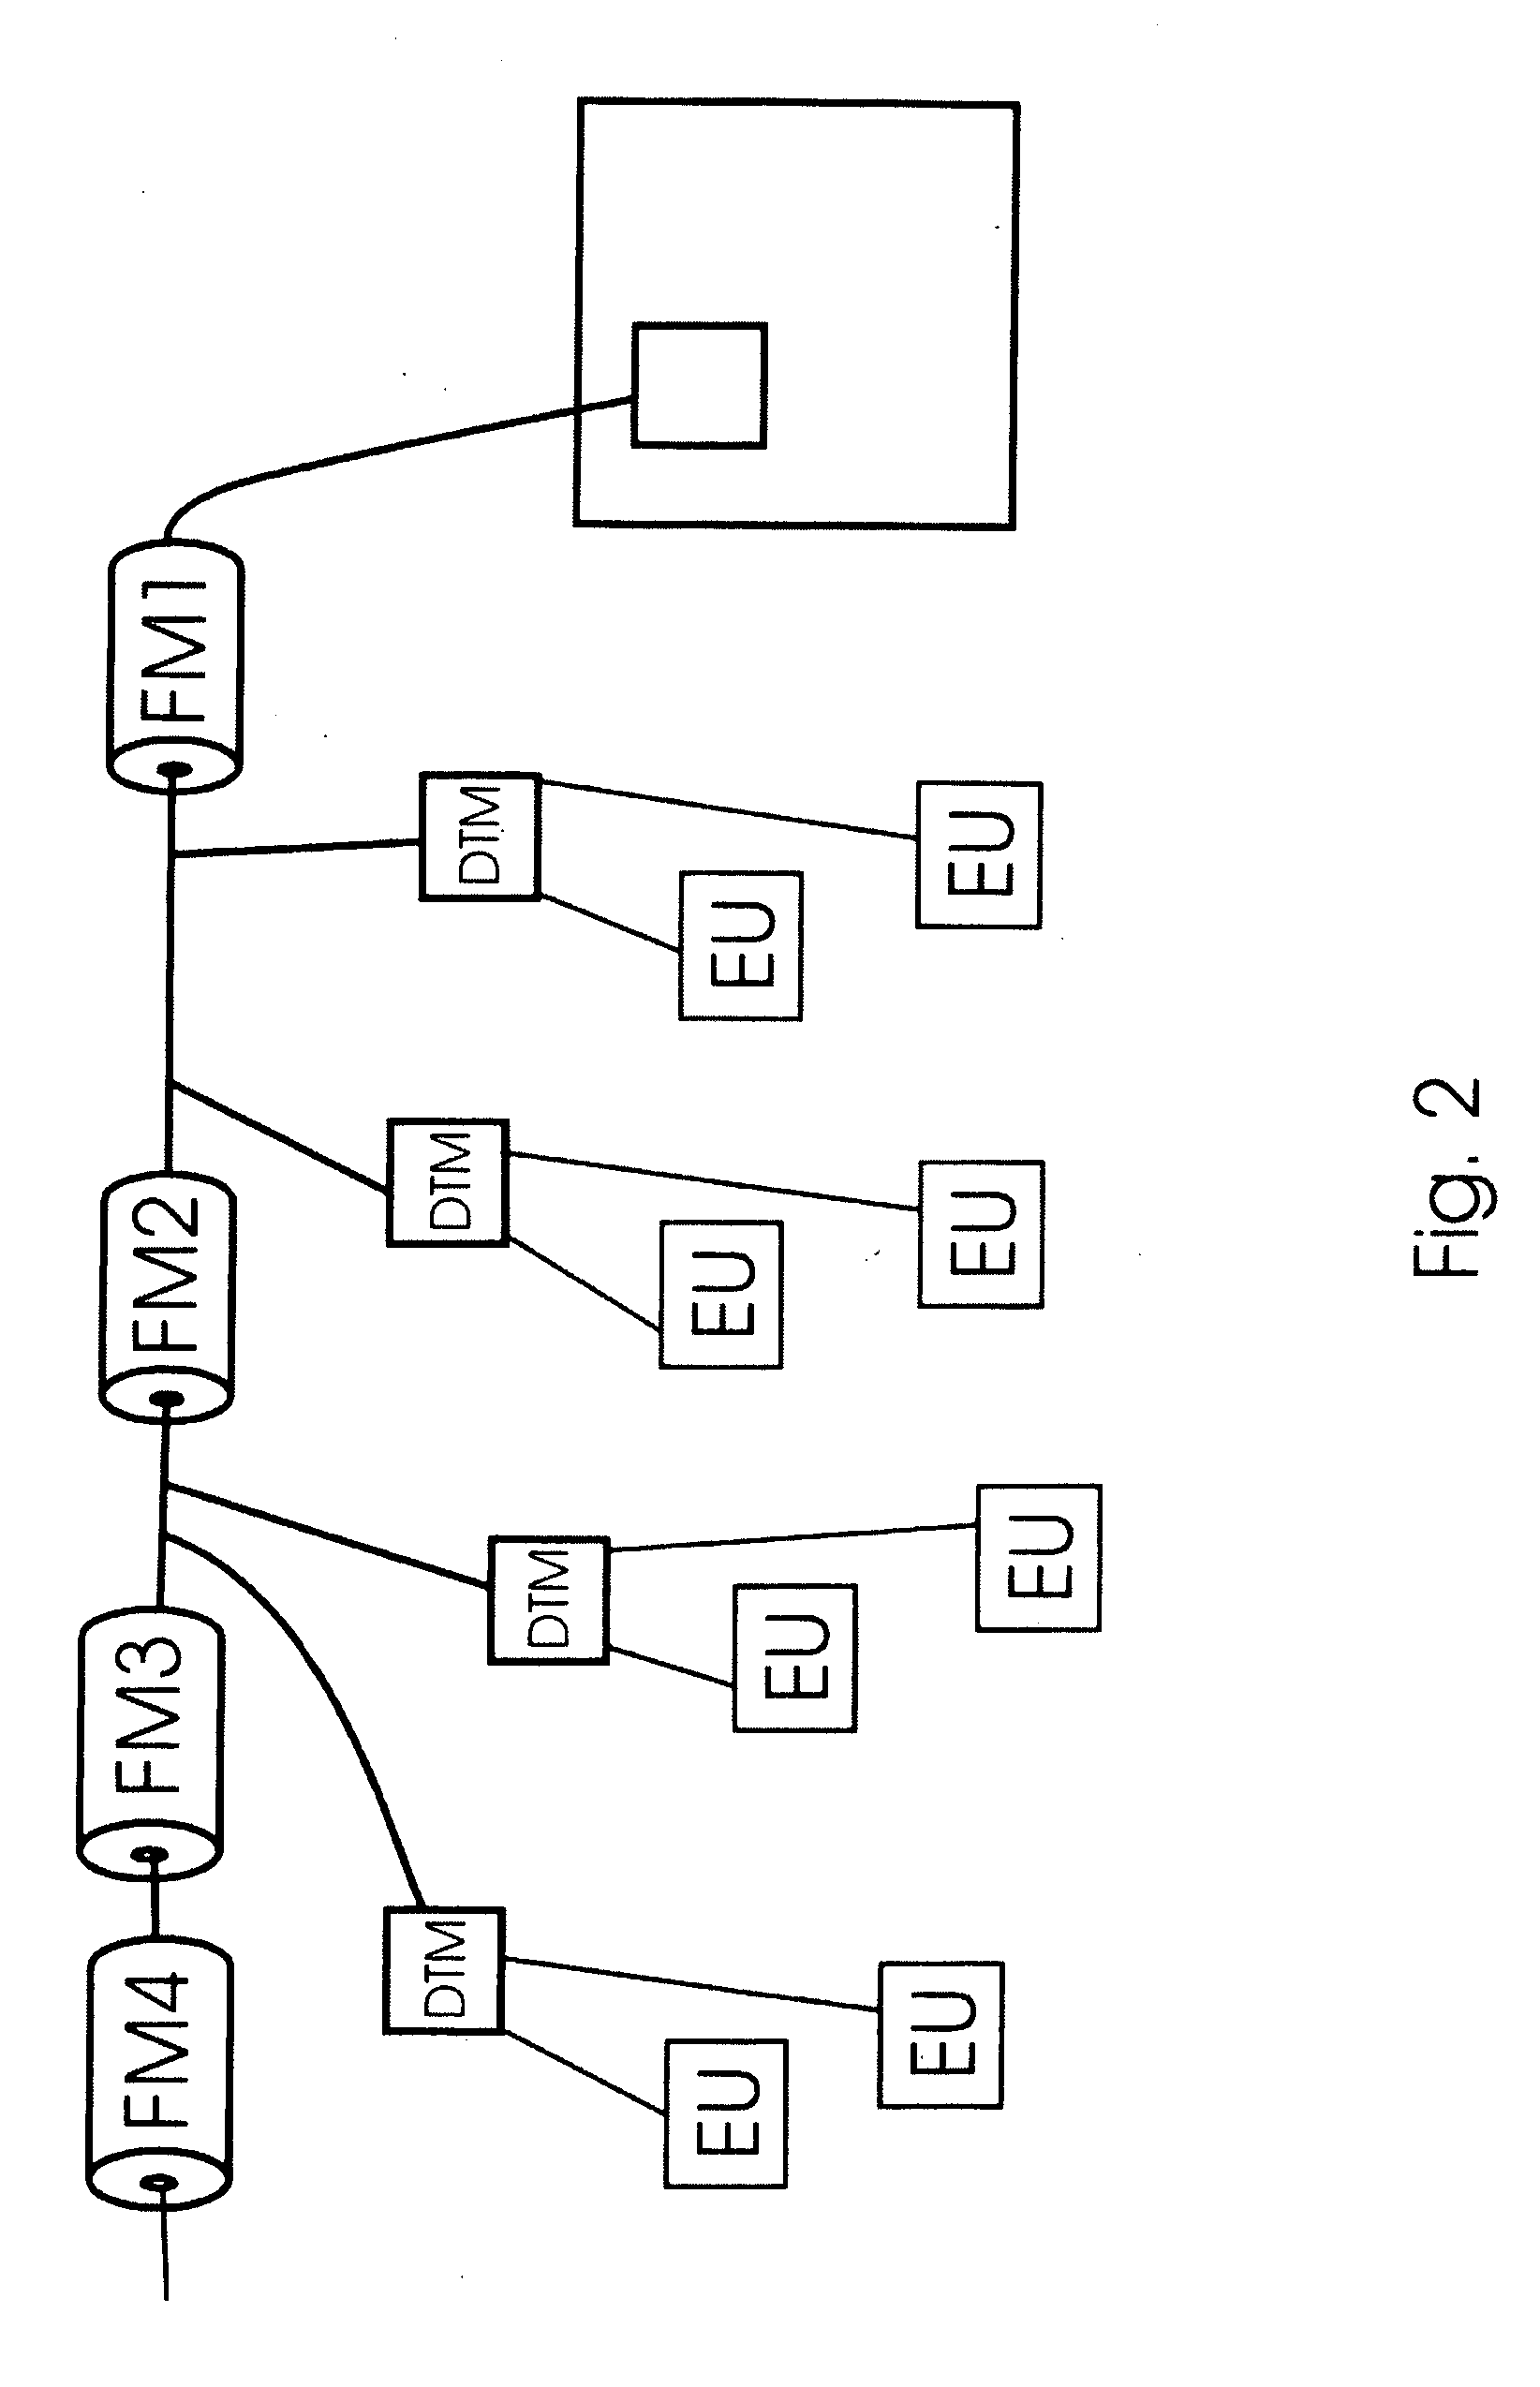 System for Automatically Detecting Power System Configuration